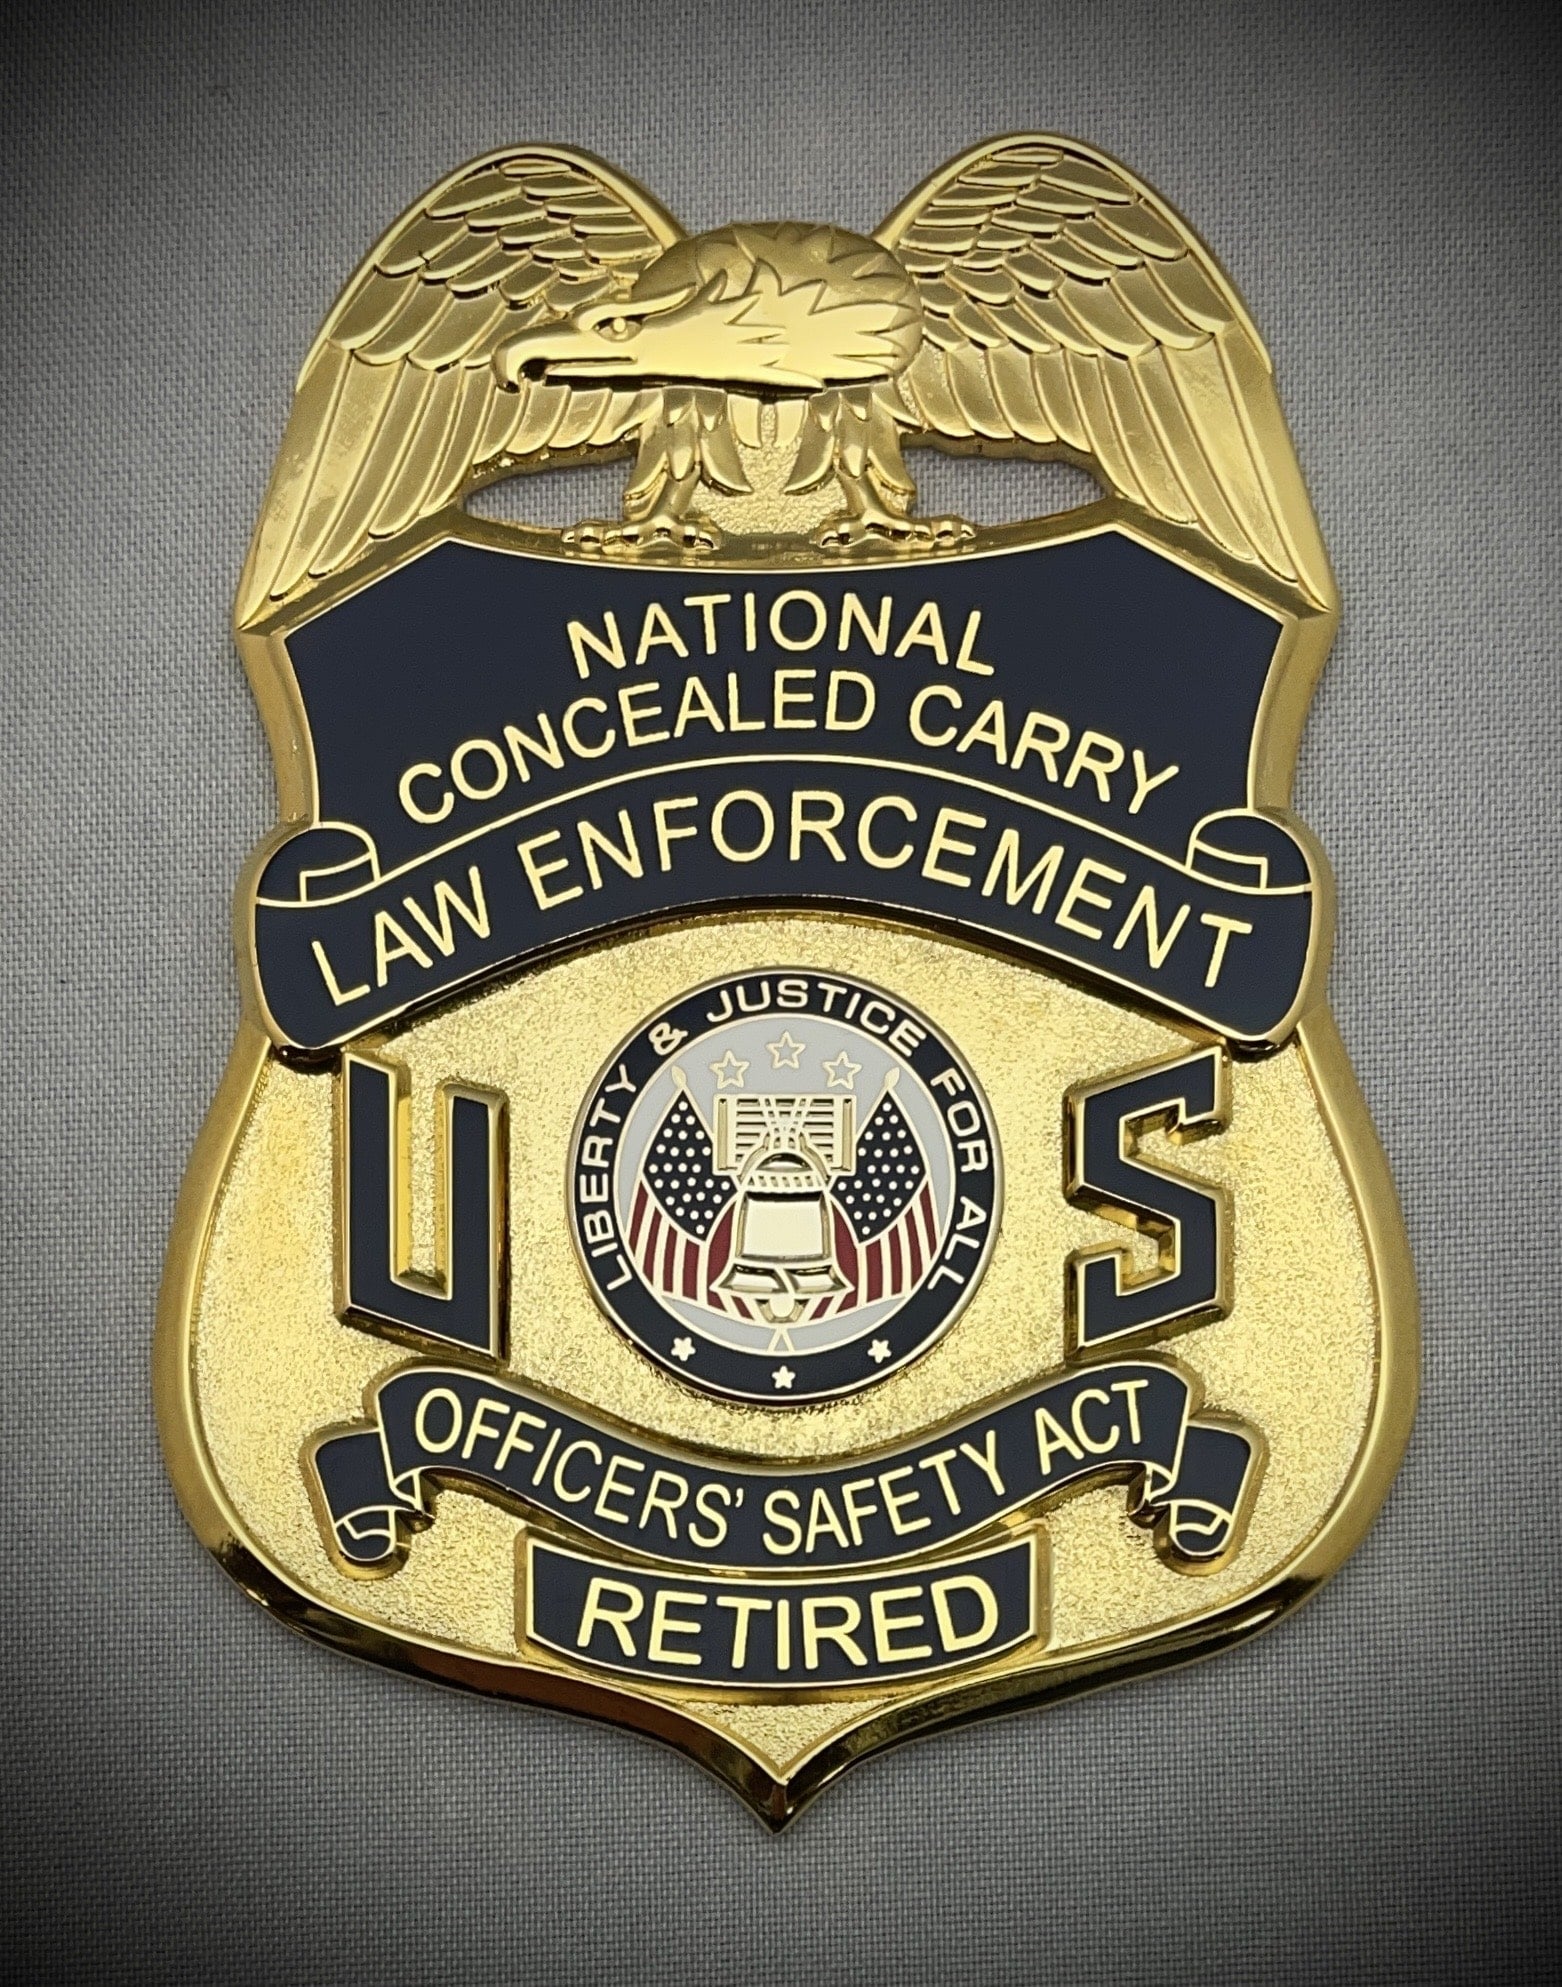 National Concealed Carry Law Enforcement Badge